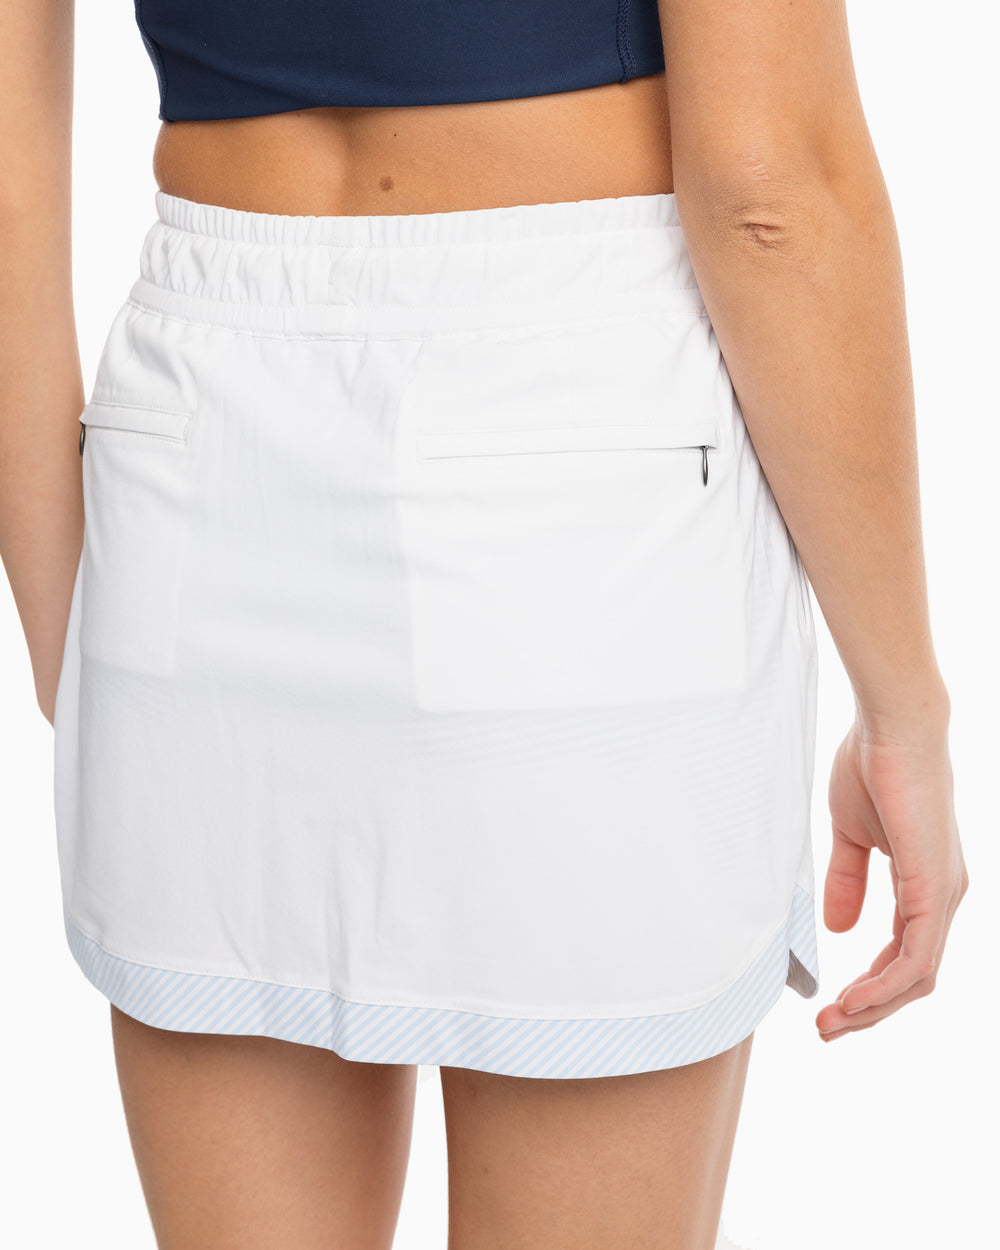 The pocket view of the Women's Kyle Skort by Southern Tide - Classic White